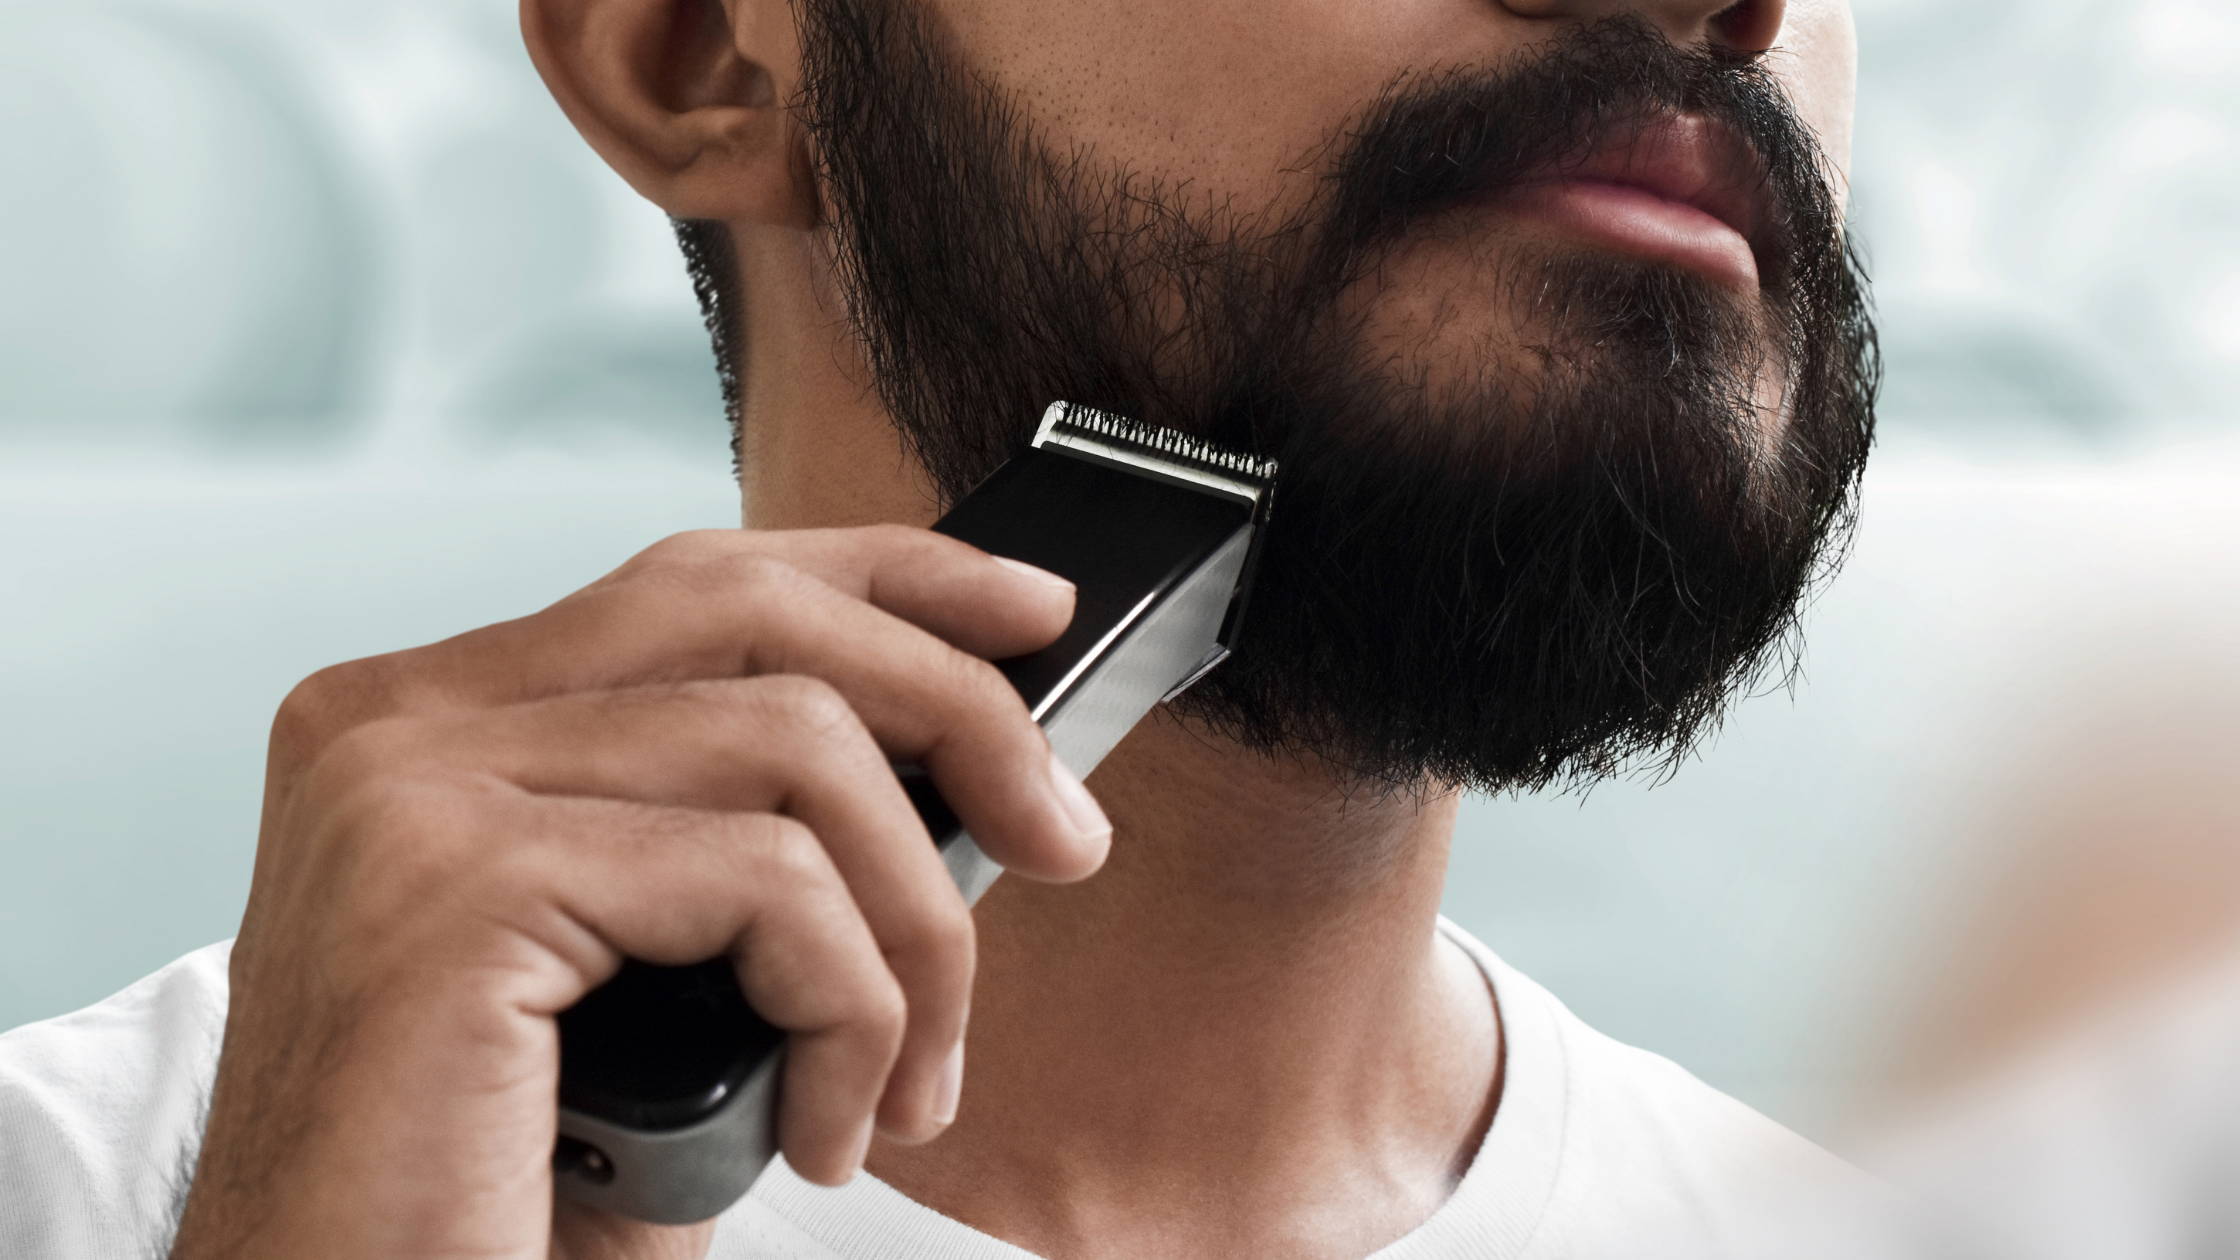 Does Shaving Your Beard Make It Grow Thicker? – DS Healthcare Group